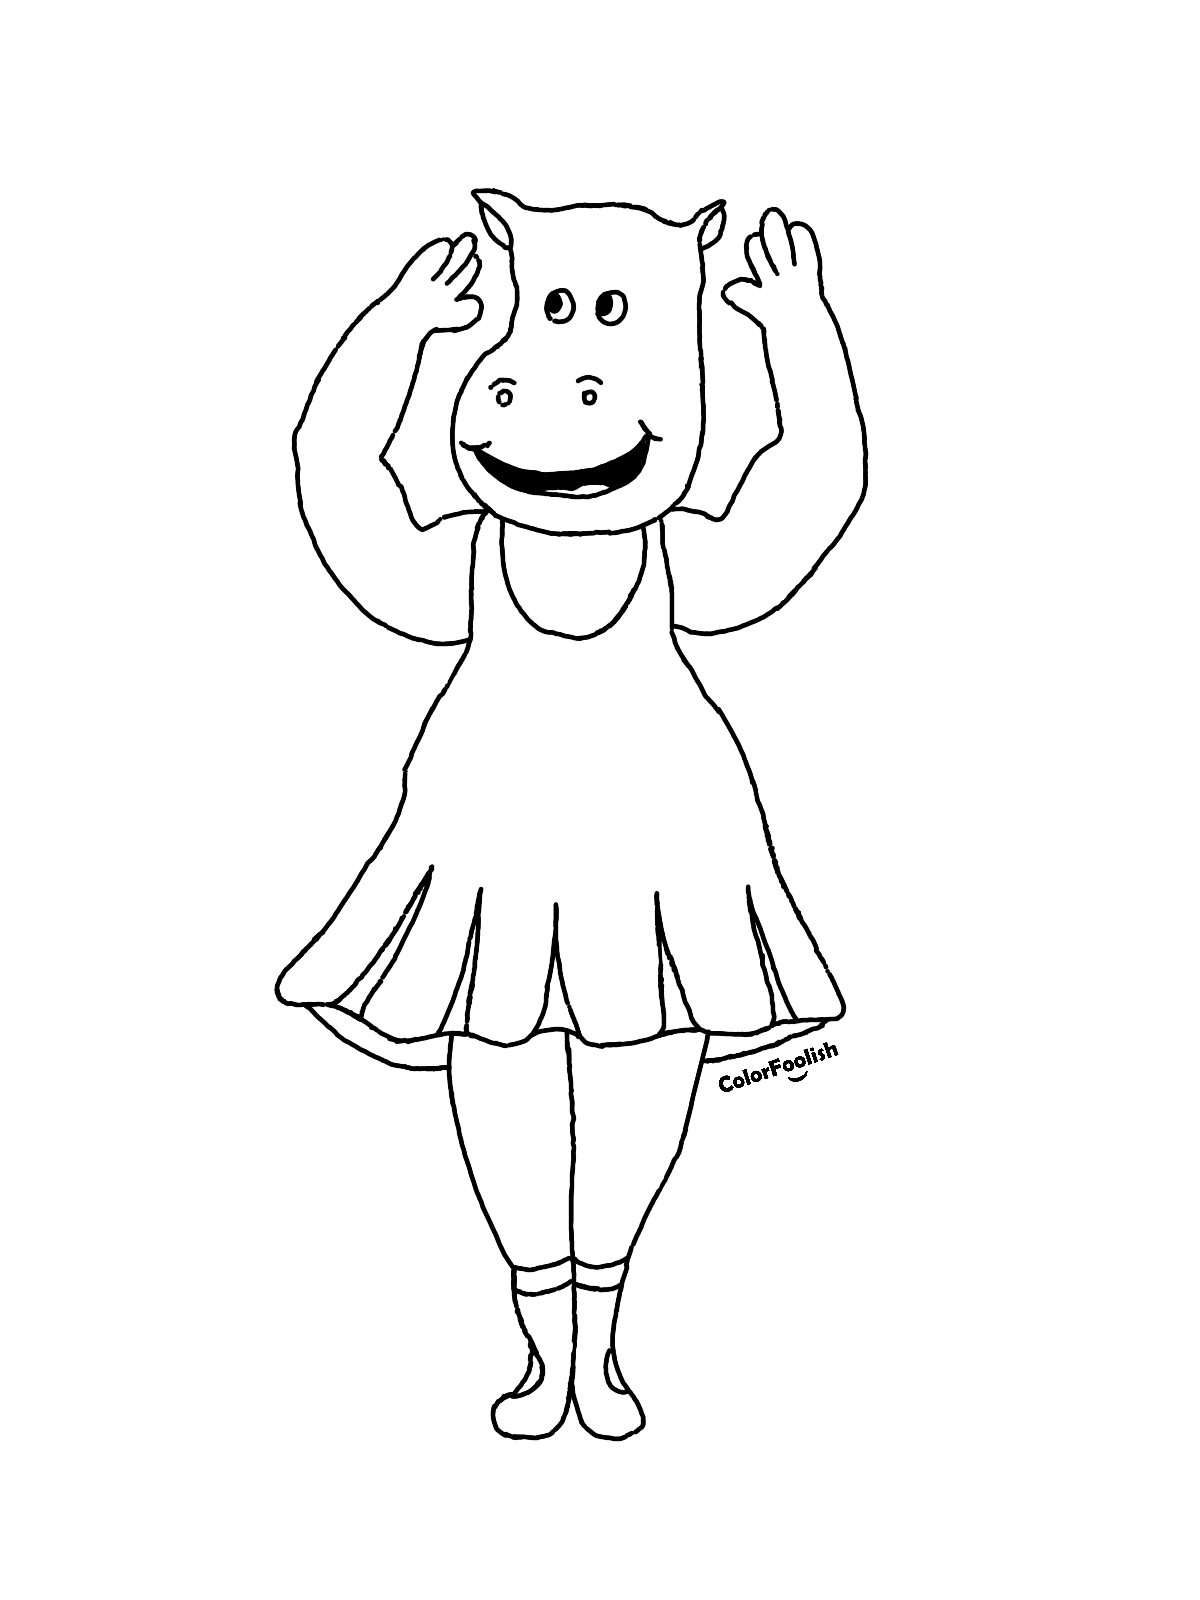 Coloring page of a hippo at ballet